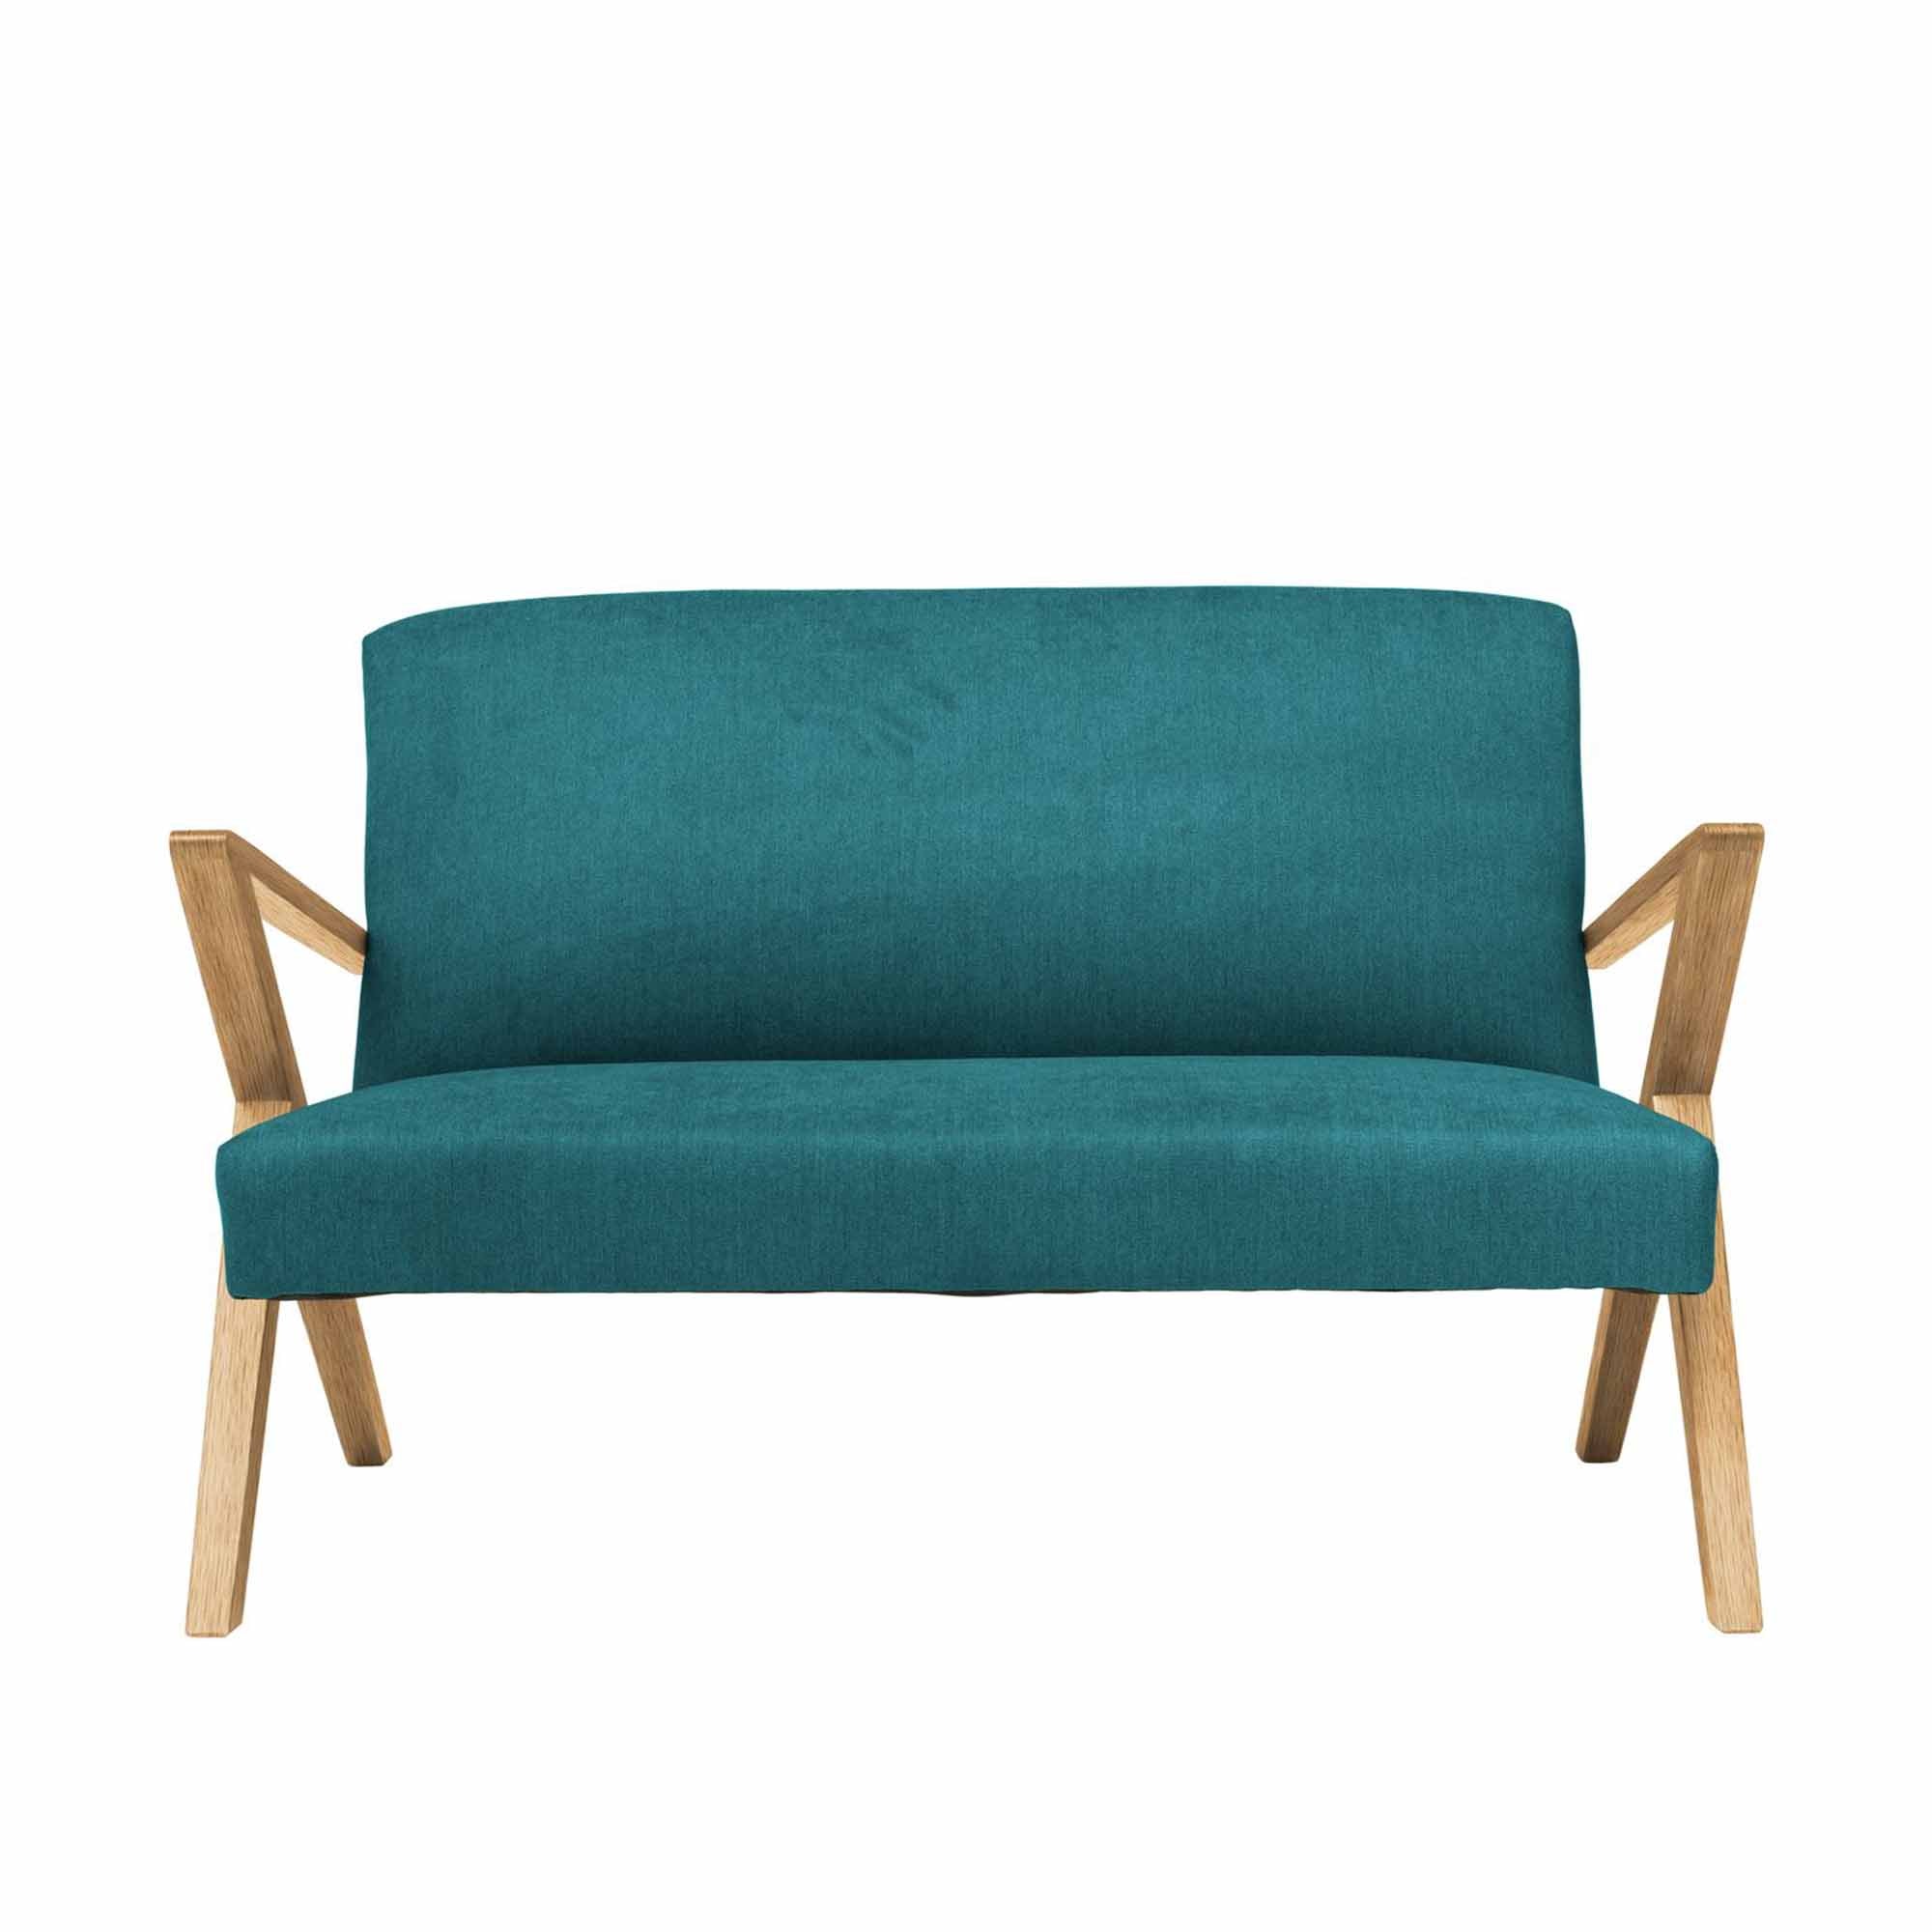  2-Seater Sofa, Oak Wood Frame, Natural Colour blue fabric, front view